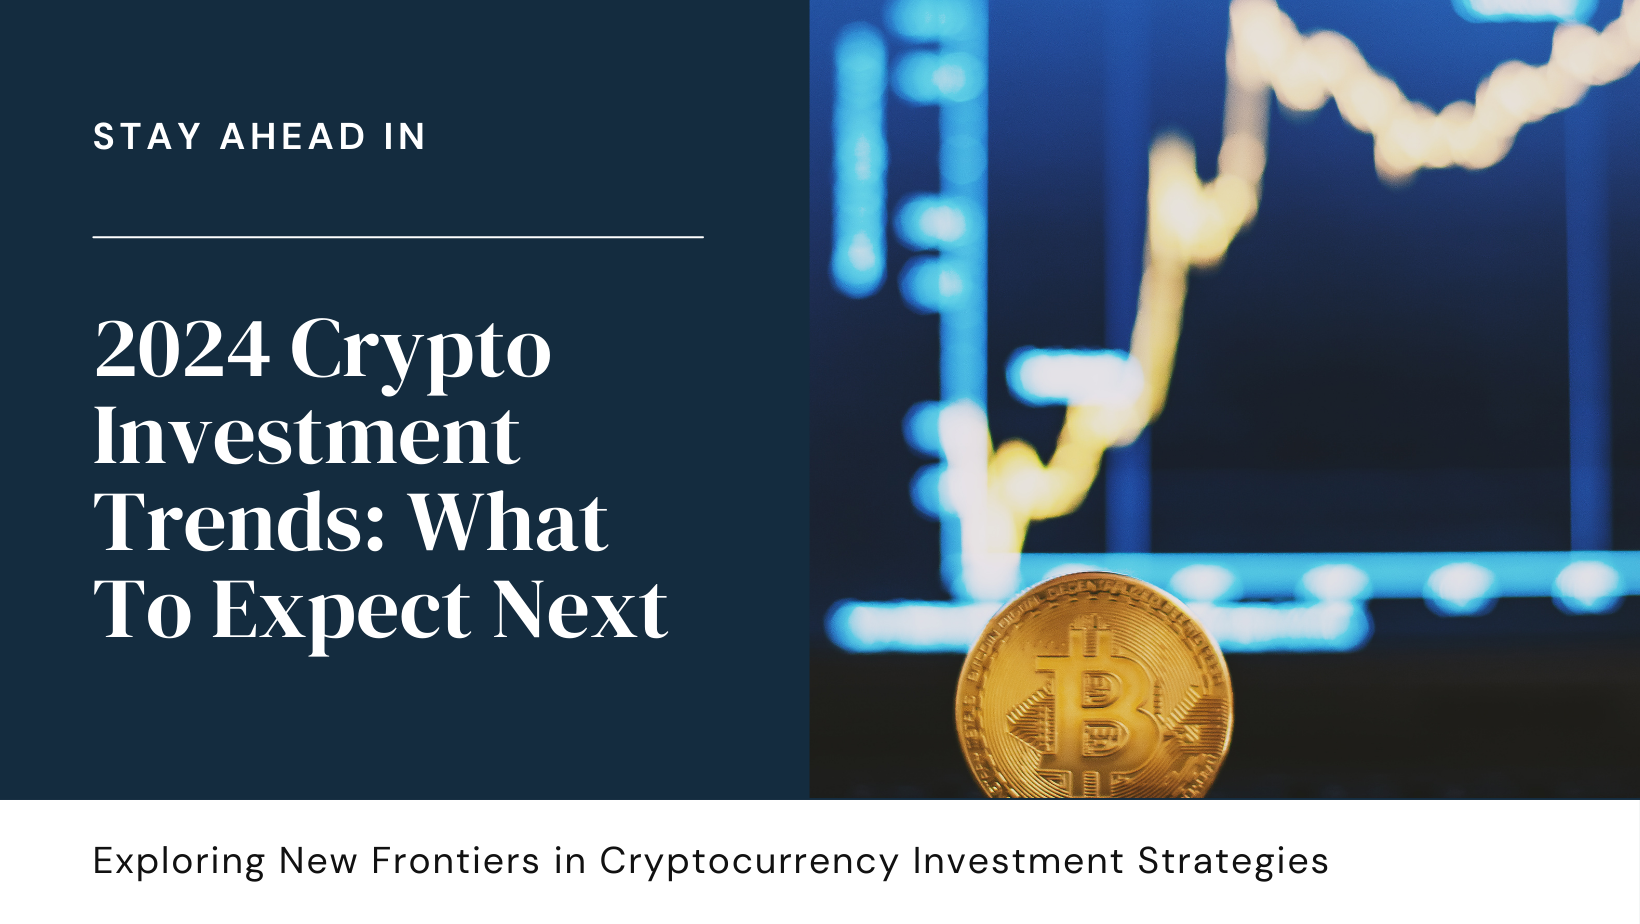 Emerging Trends in Crypto Investment for 2024